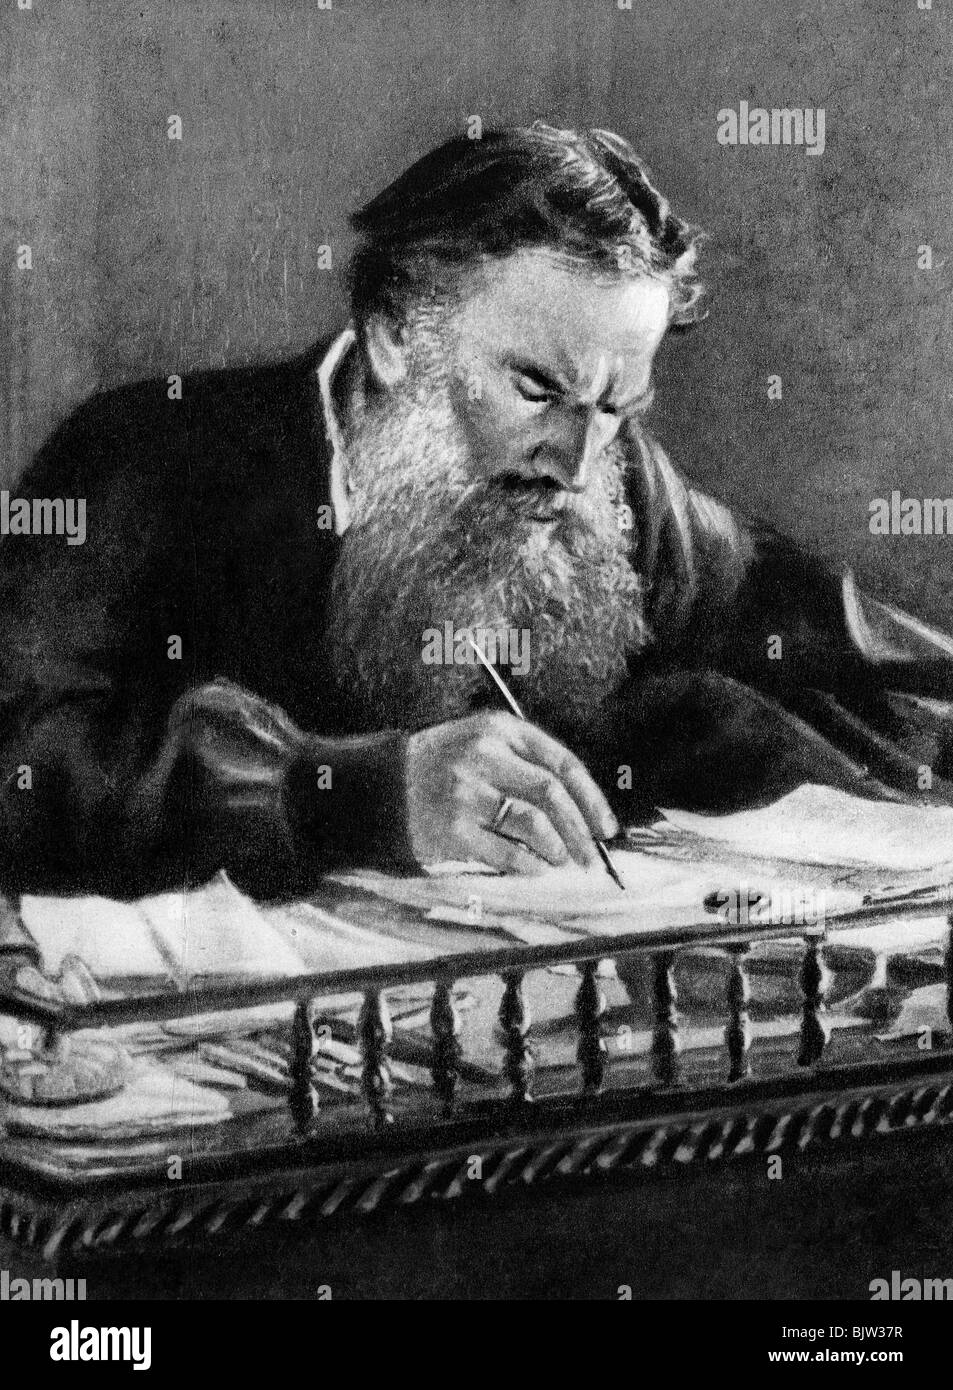 Tolstoy, Lev Nikolayevich, 9.9.1825 - 20.11.1910, Russian author / writer, working, after painting by Nikolai Nikolaevich Ge, 1884, , Stock Photo